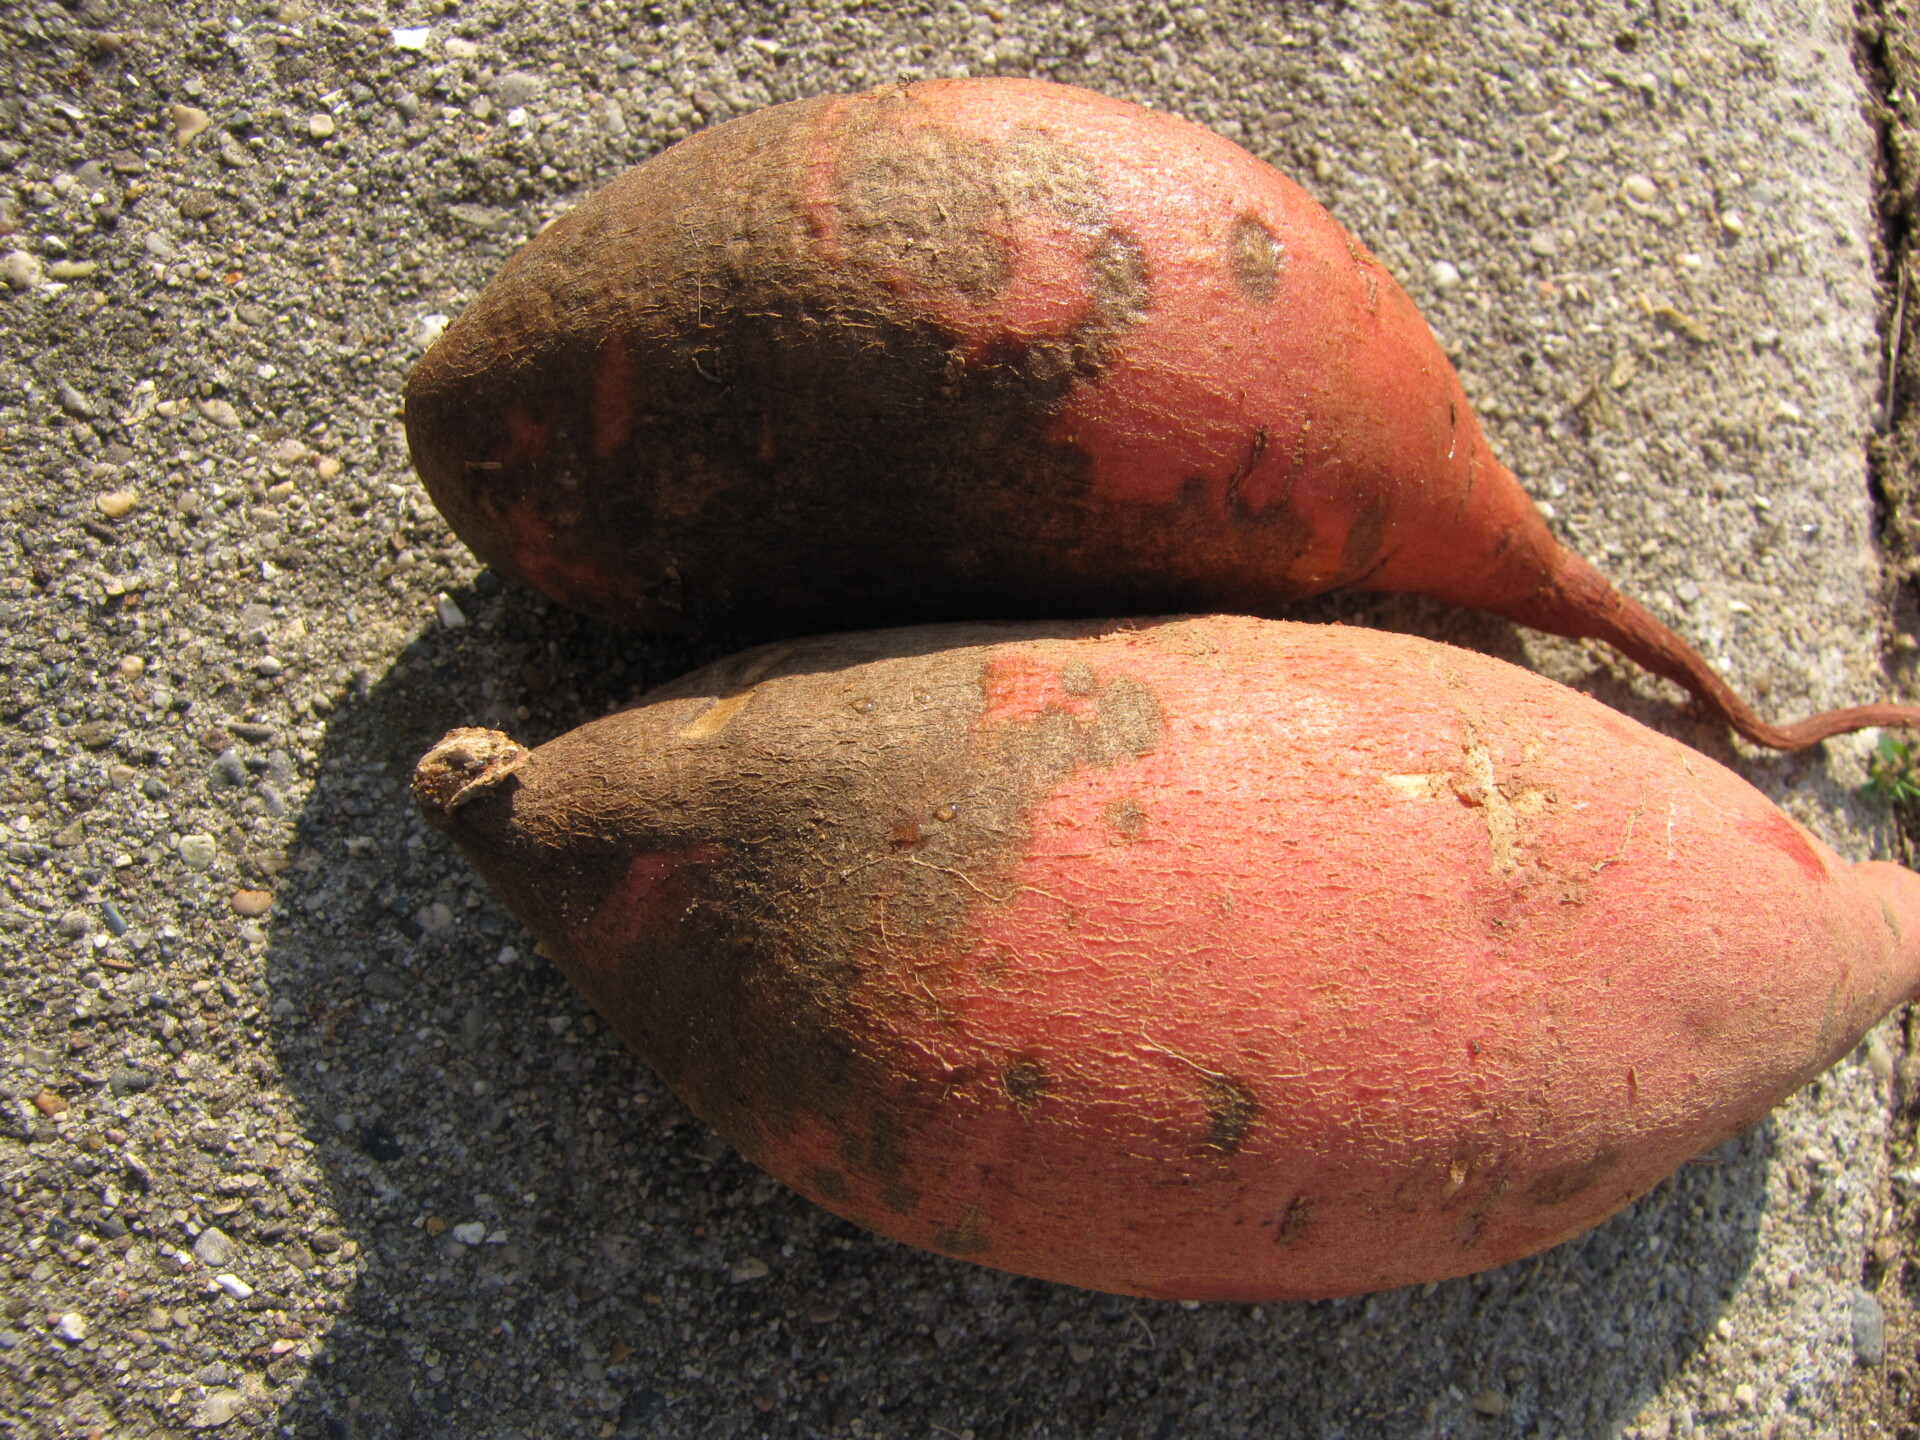 Figure 2. Scurf of sweet potato. Note gray, brown stain on surface.